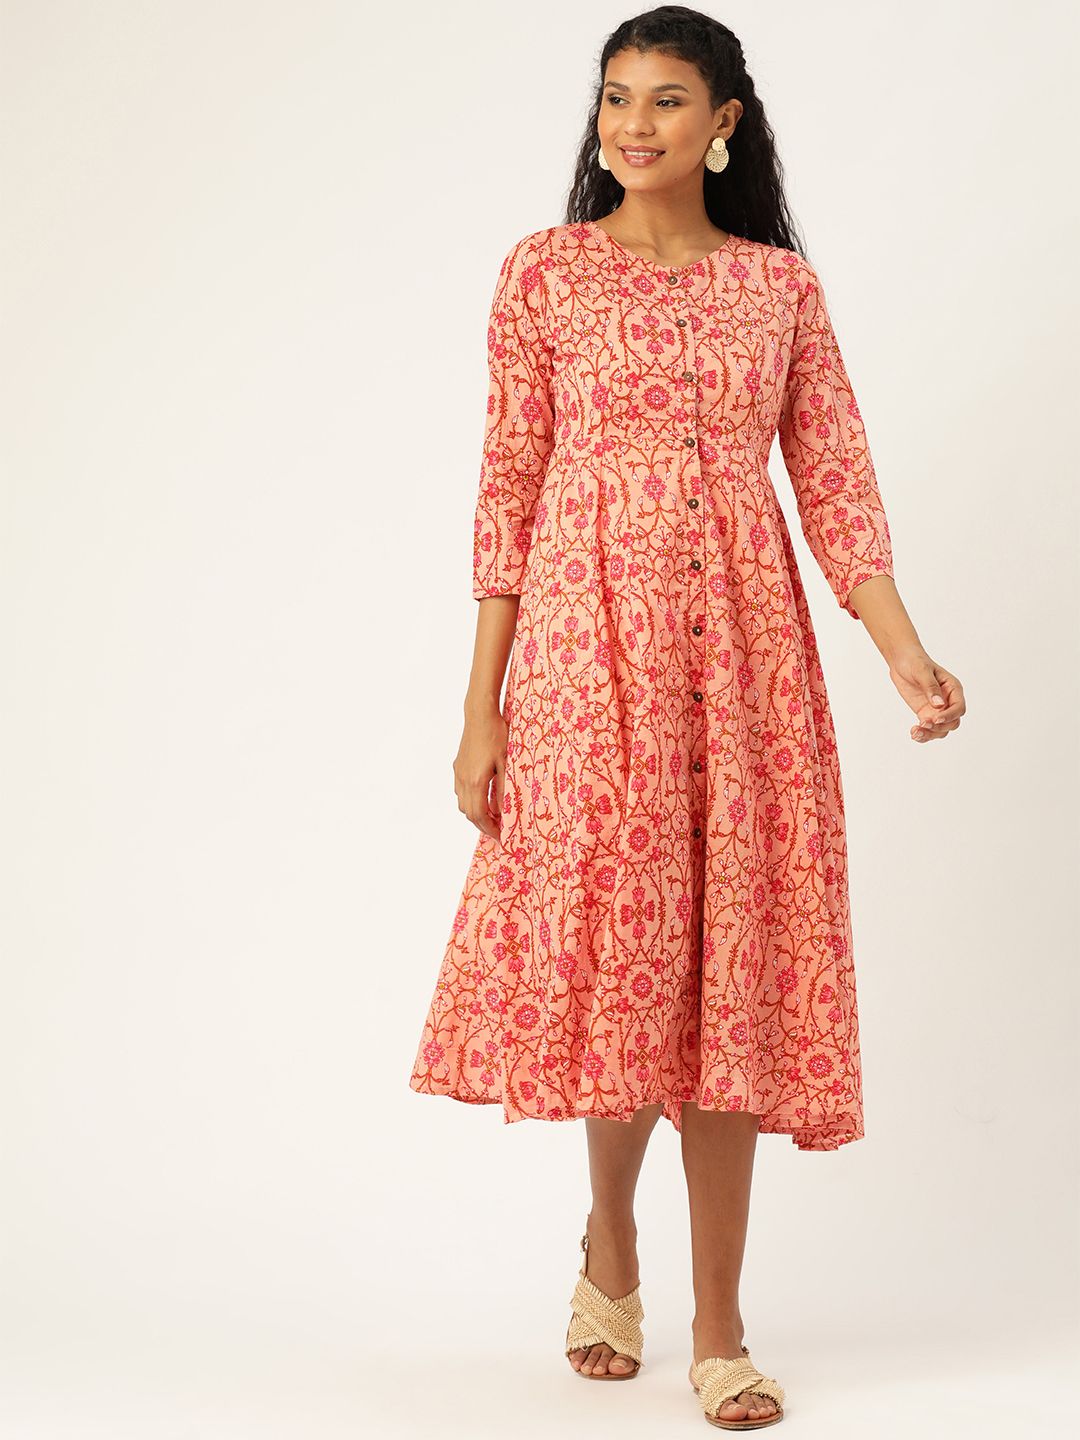 Shae by SASSAFRAS Women Peach-Coloured Printed A-Line Dress Price in India